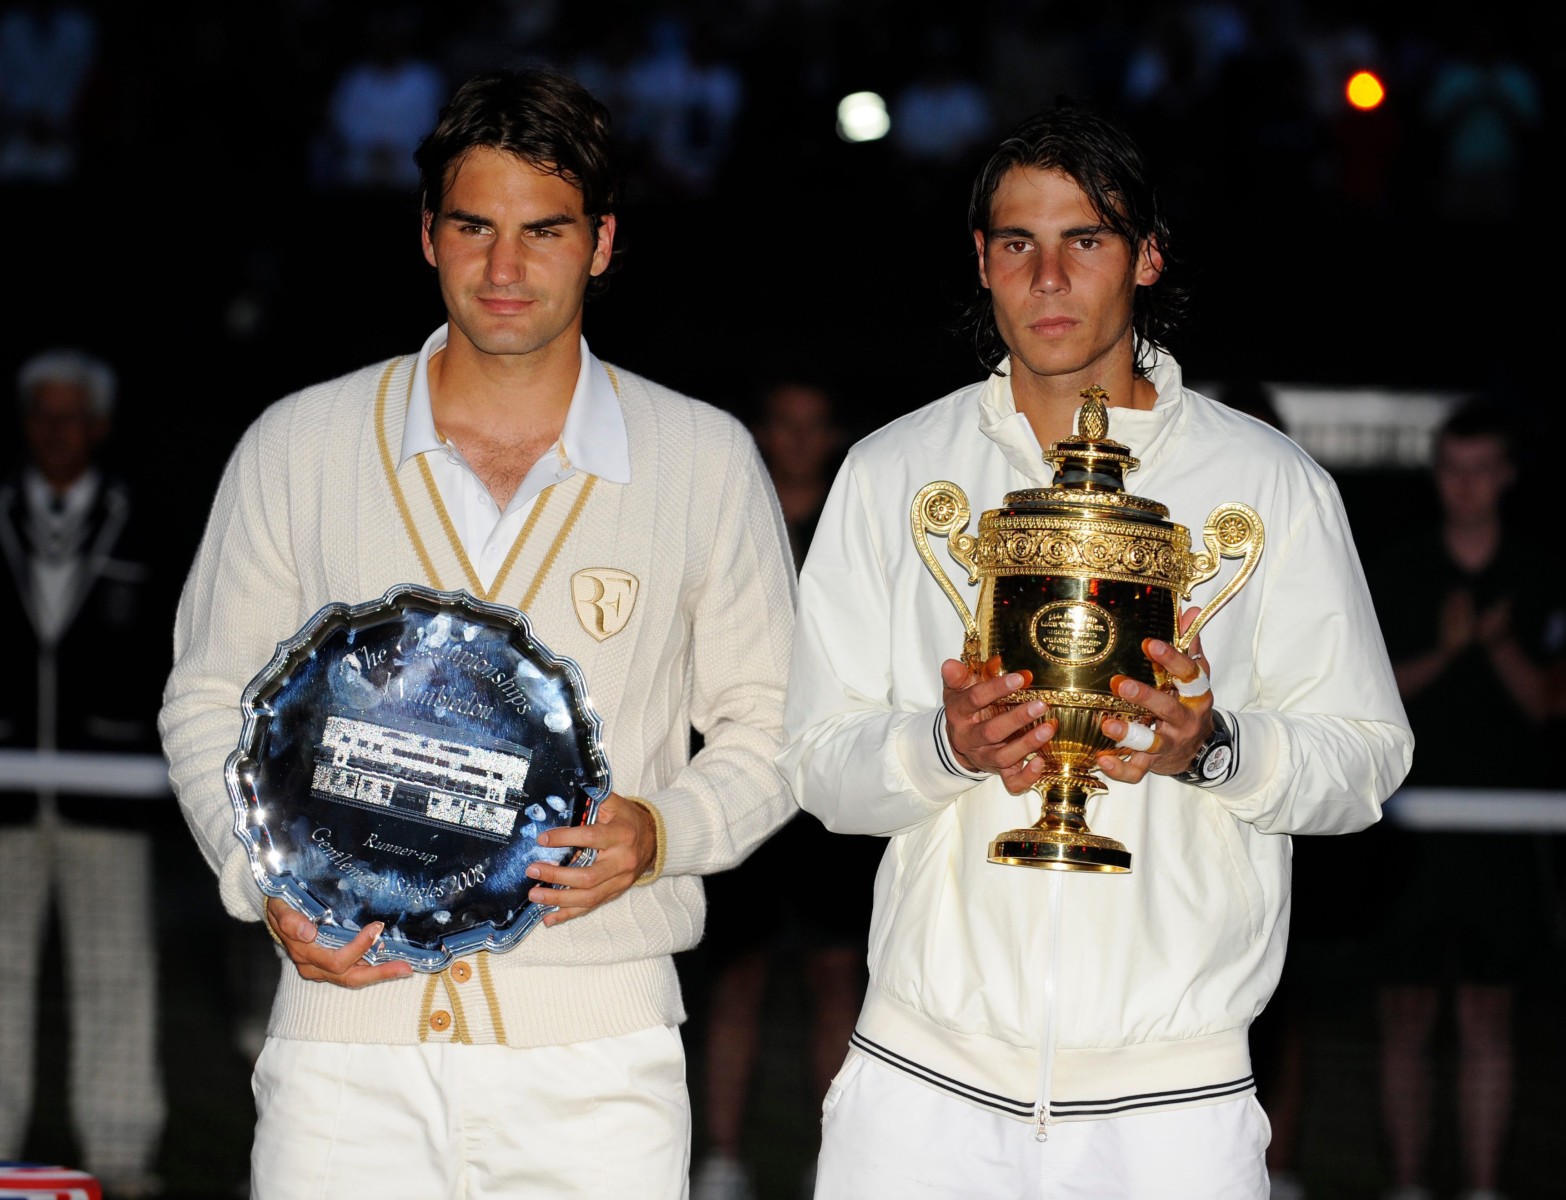 The pair have met 40 times in total and won a combined 39 Grand Slams in their illustrious careers